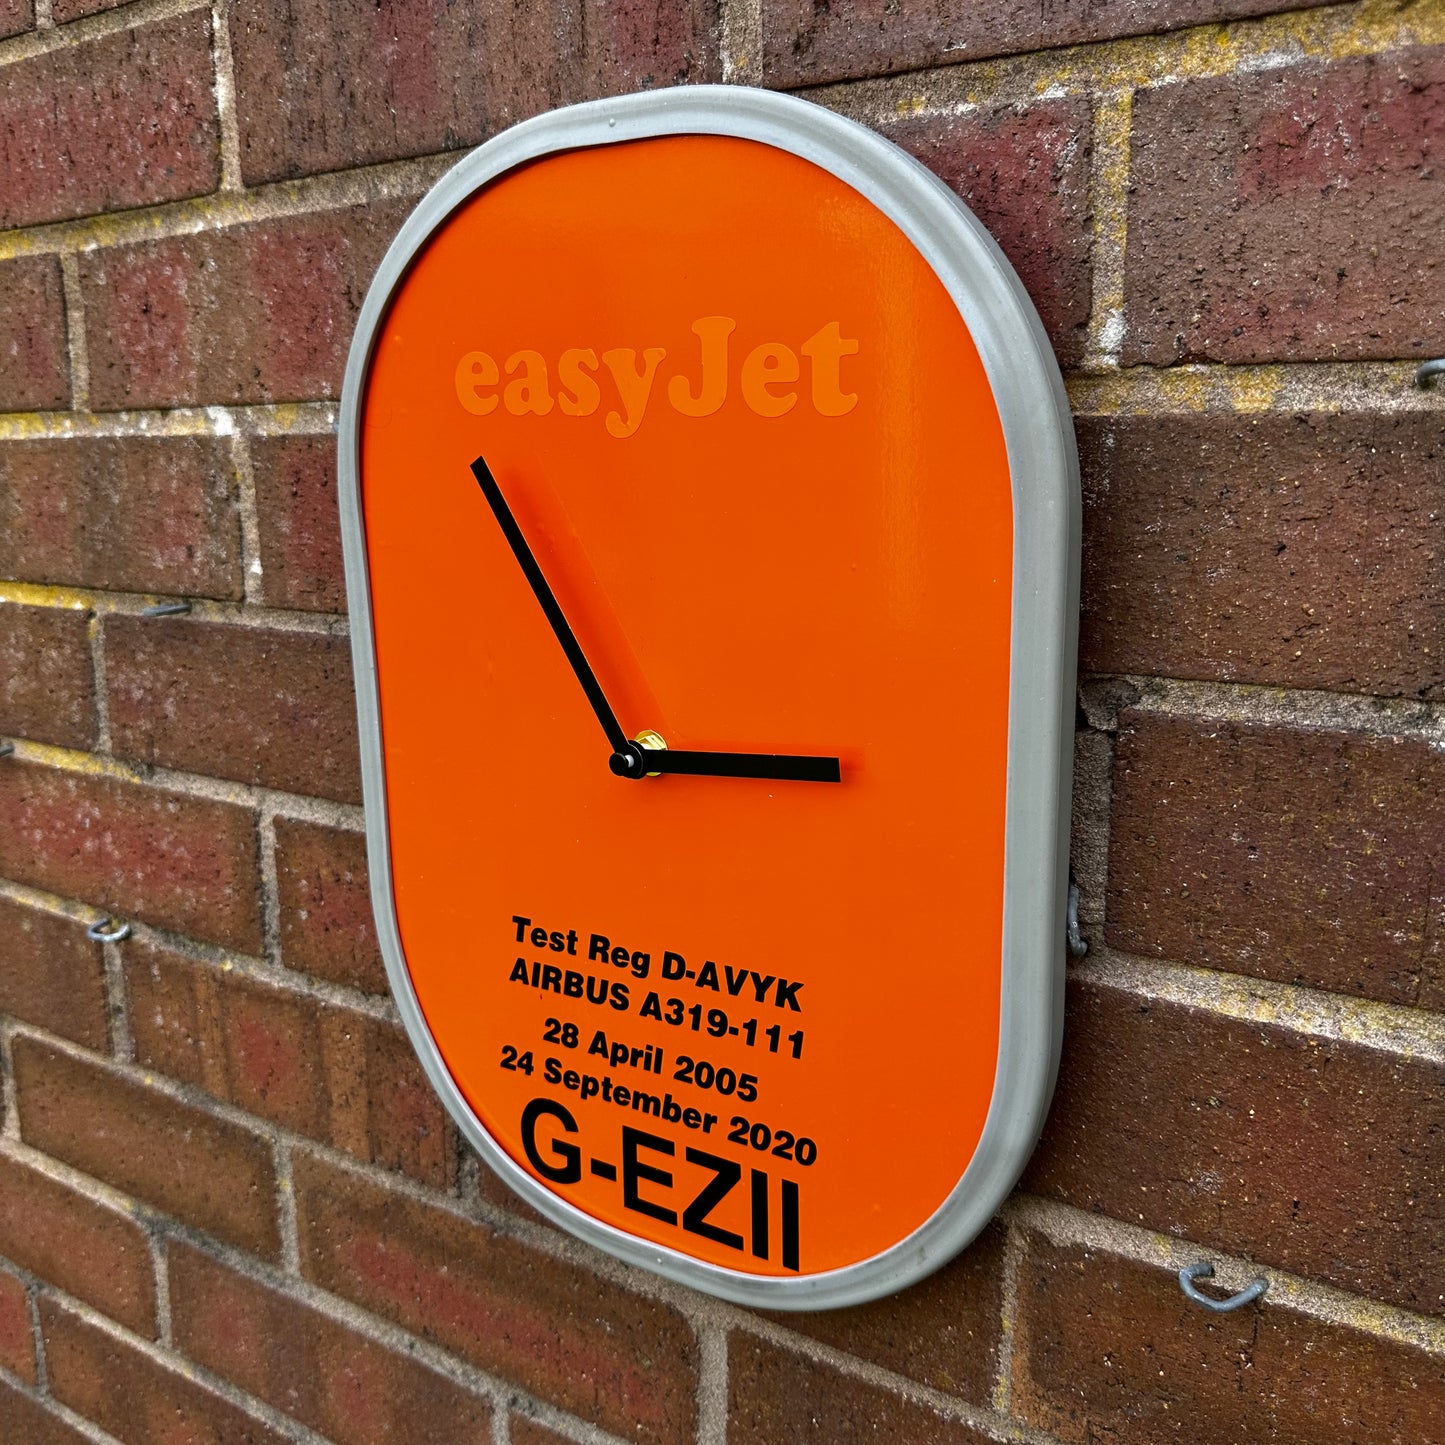 EASYJET AIRLINES G-EZII Airbus A319 Window Clock